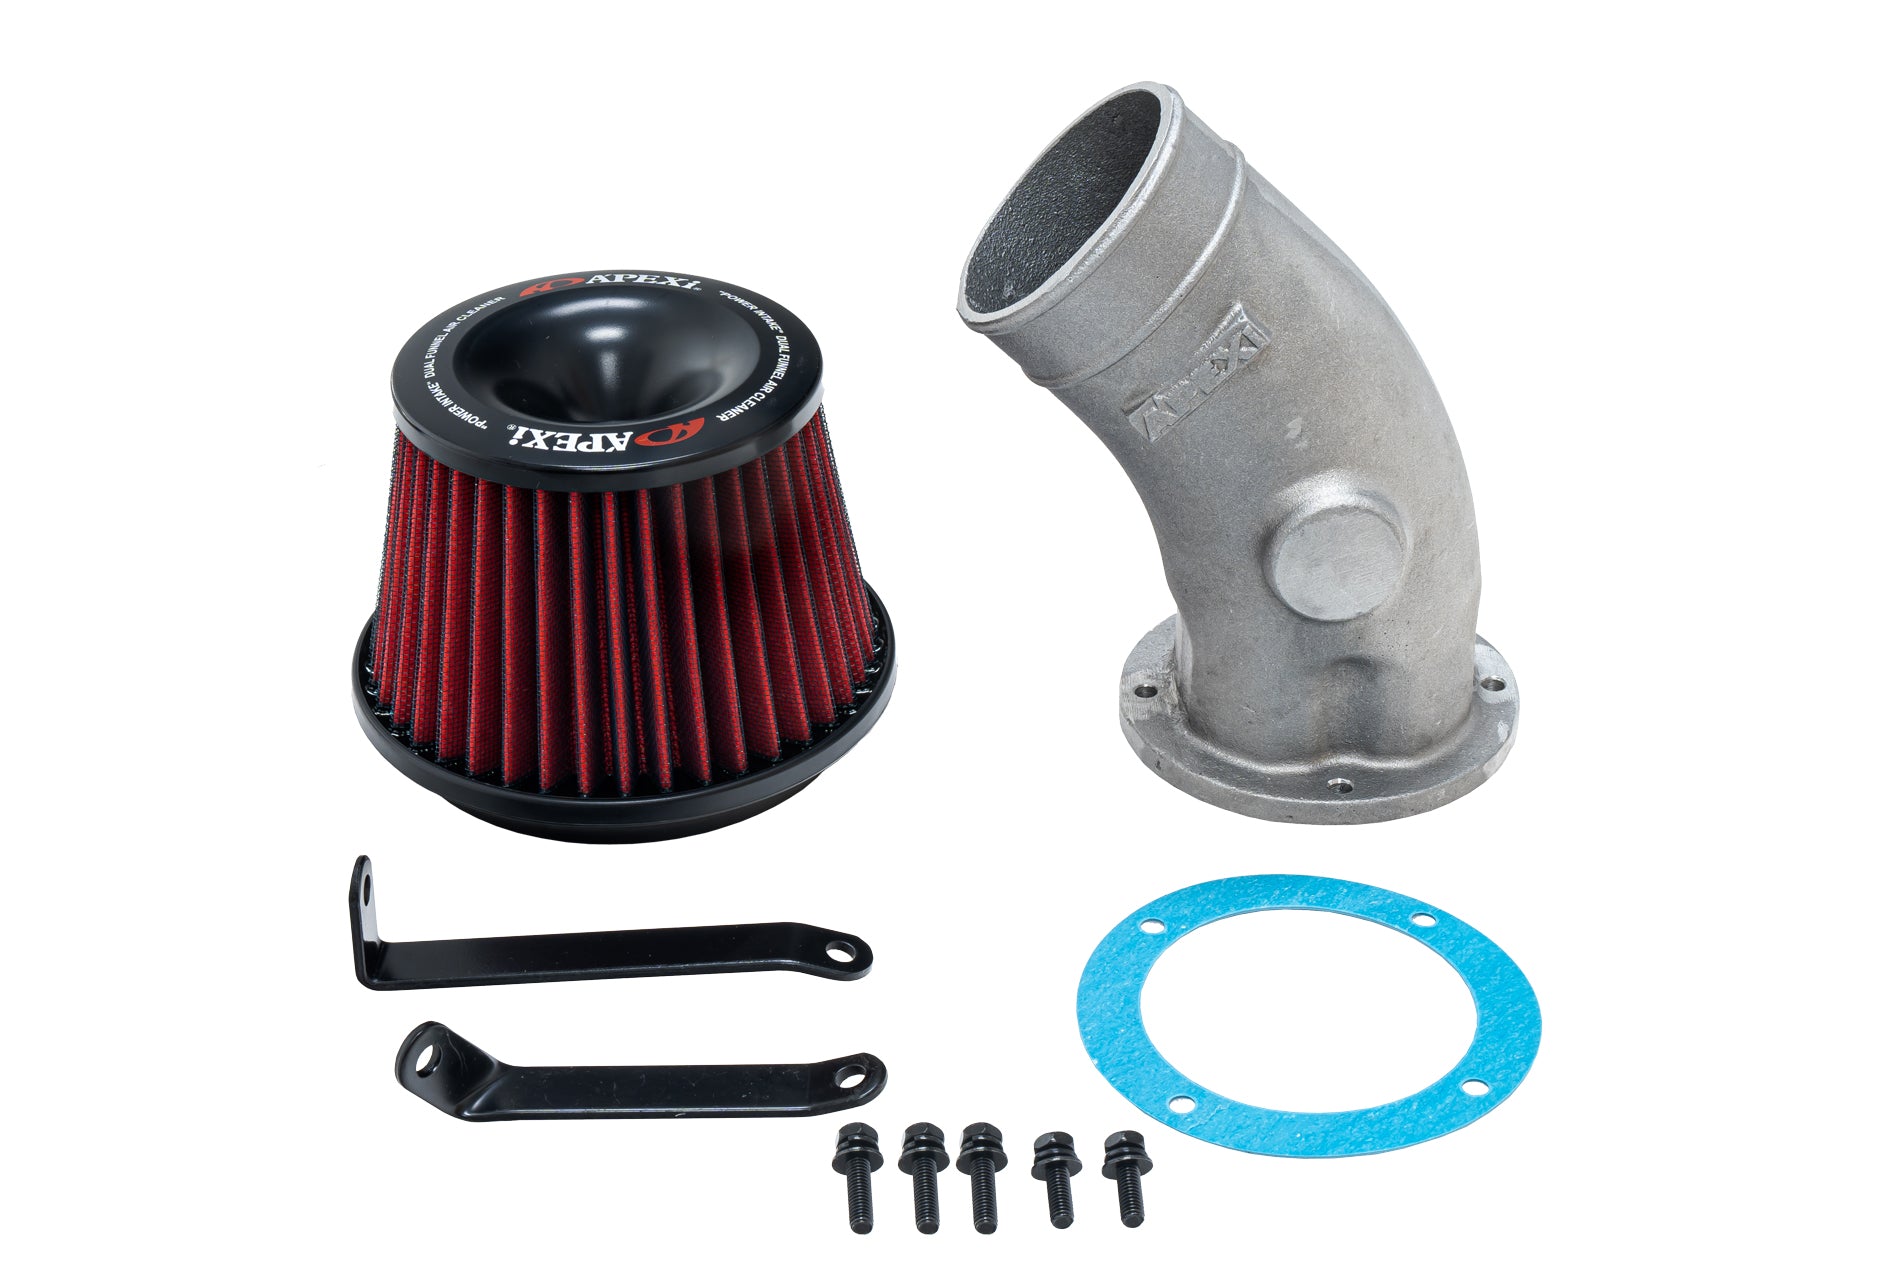 A'PEXi - Power Intake Kit - Toyota Mark II/ Chaser (JZX90) 93-96